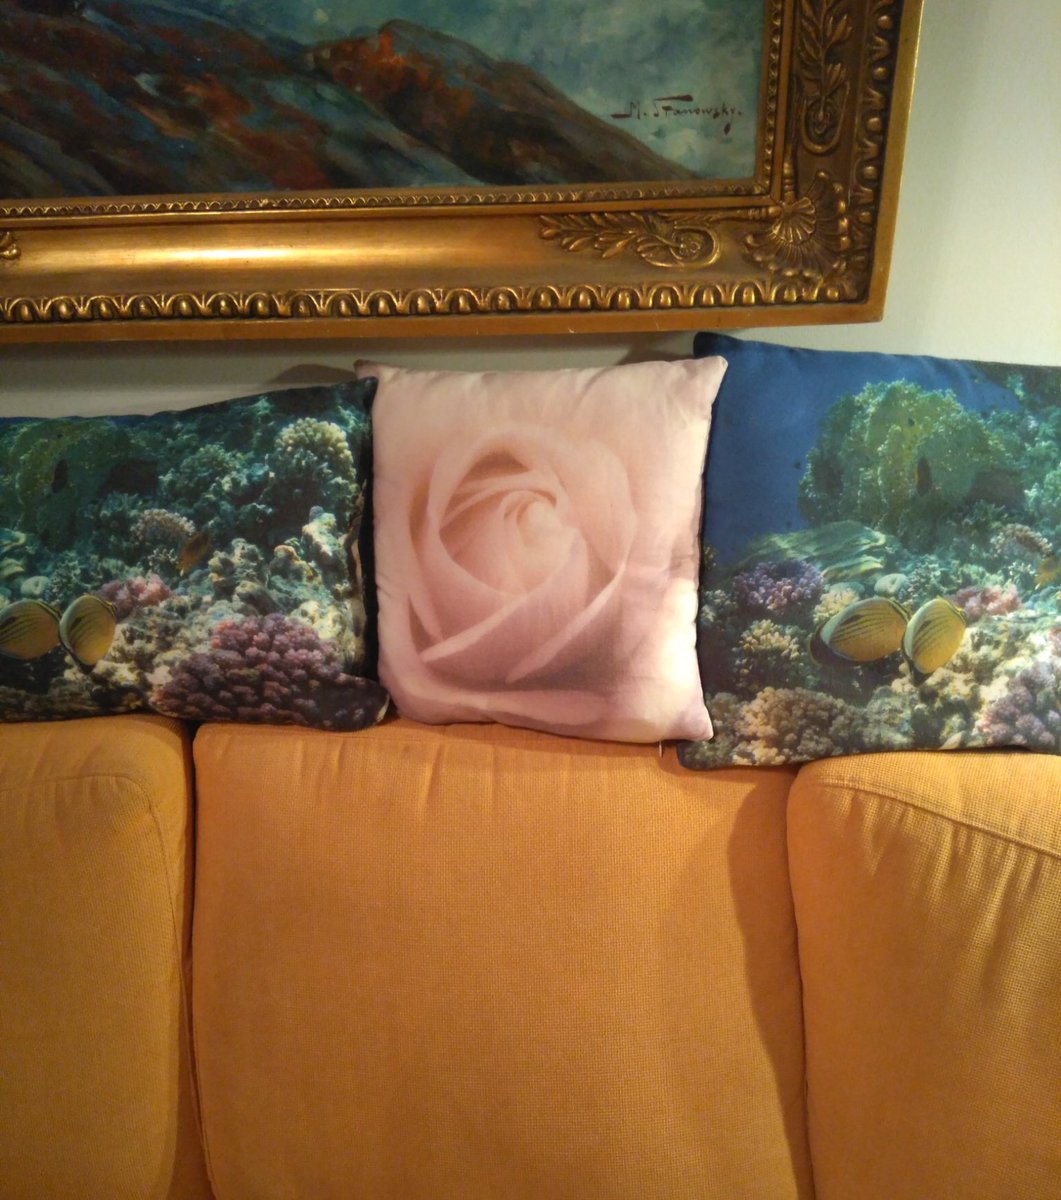 Happy customer 😊 sent an image of my 3 pillows on their couch.
#artistlife
#happiness
#bestcustomers
#artlove
#homedecor